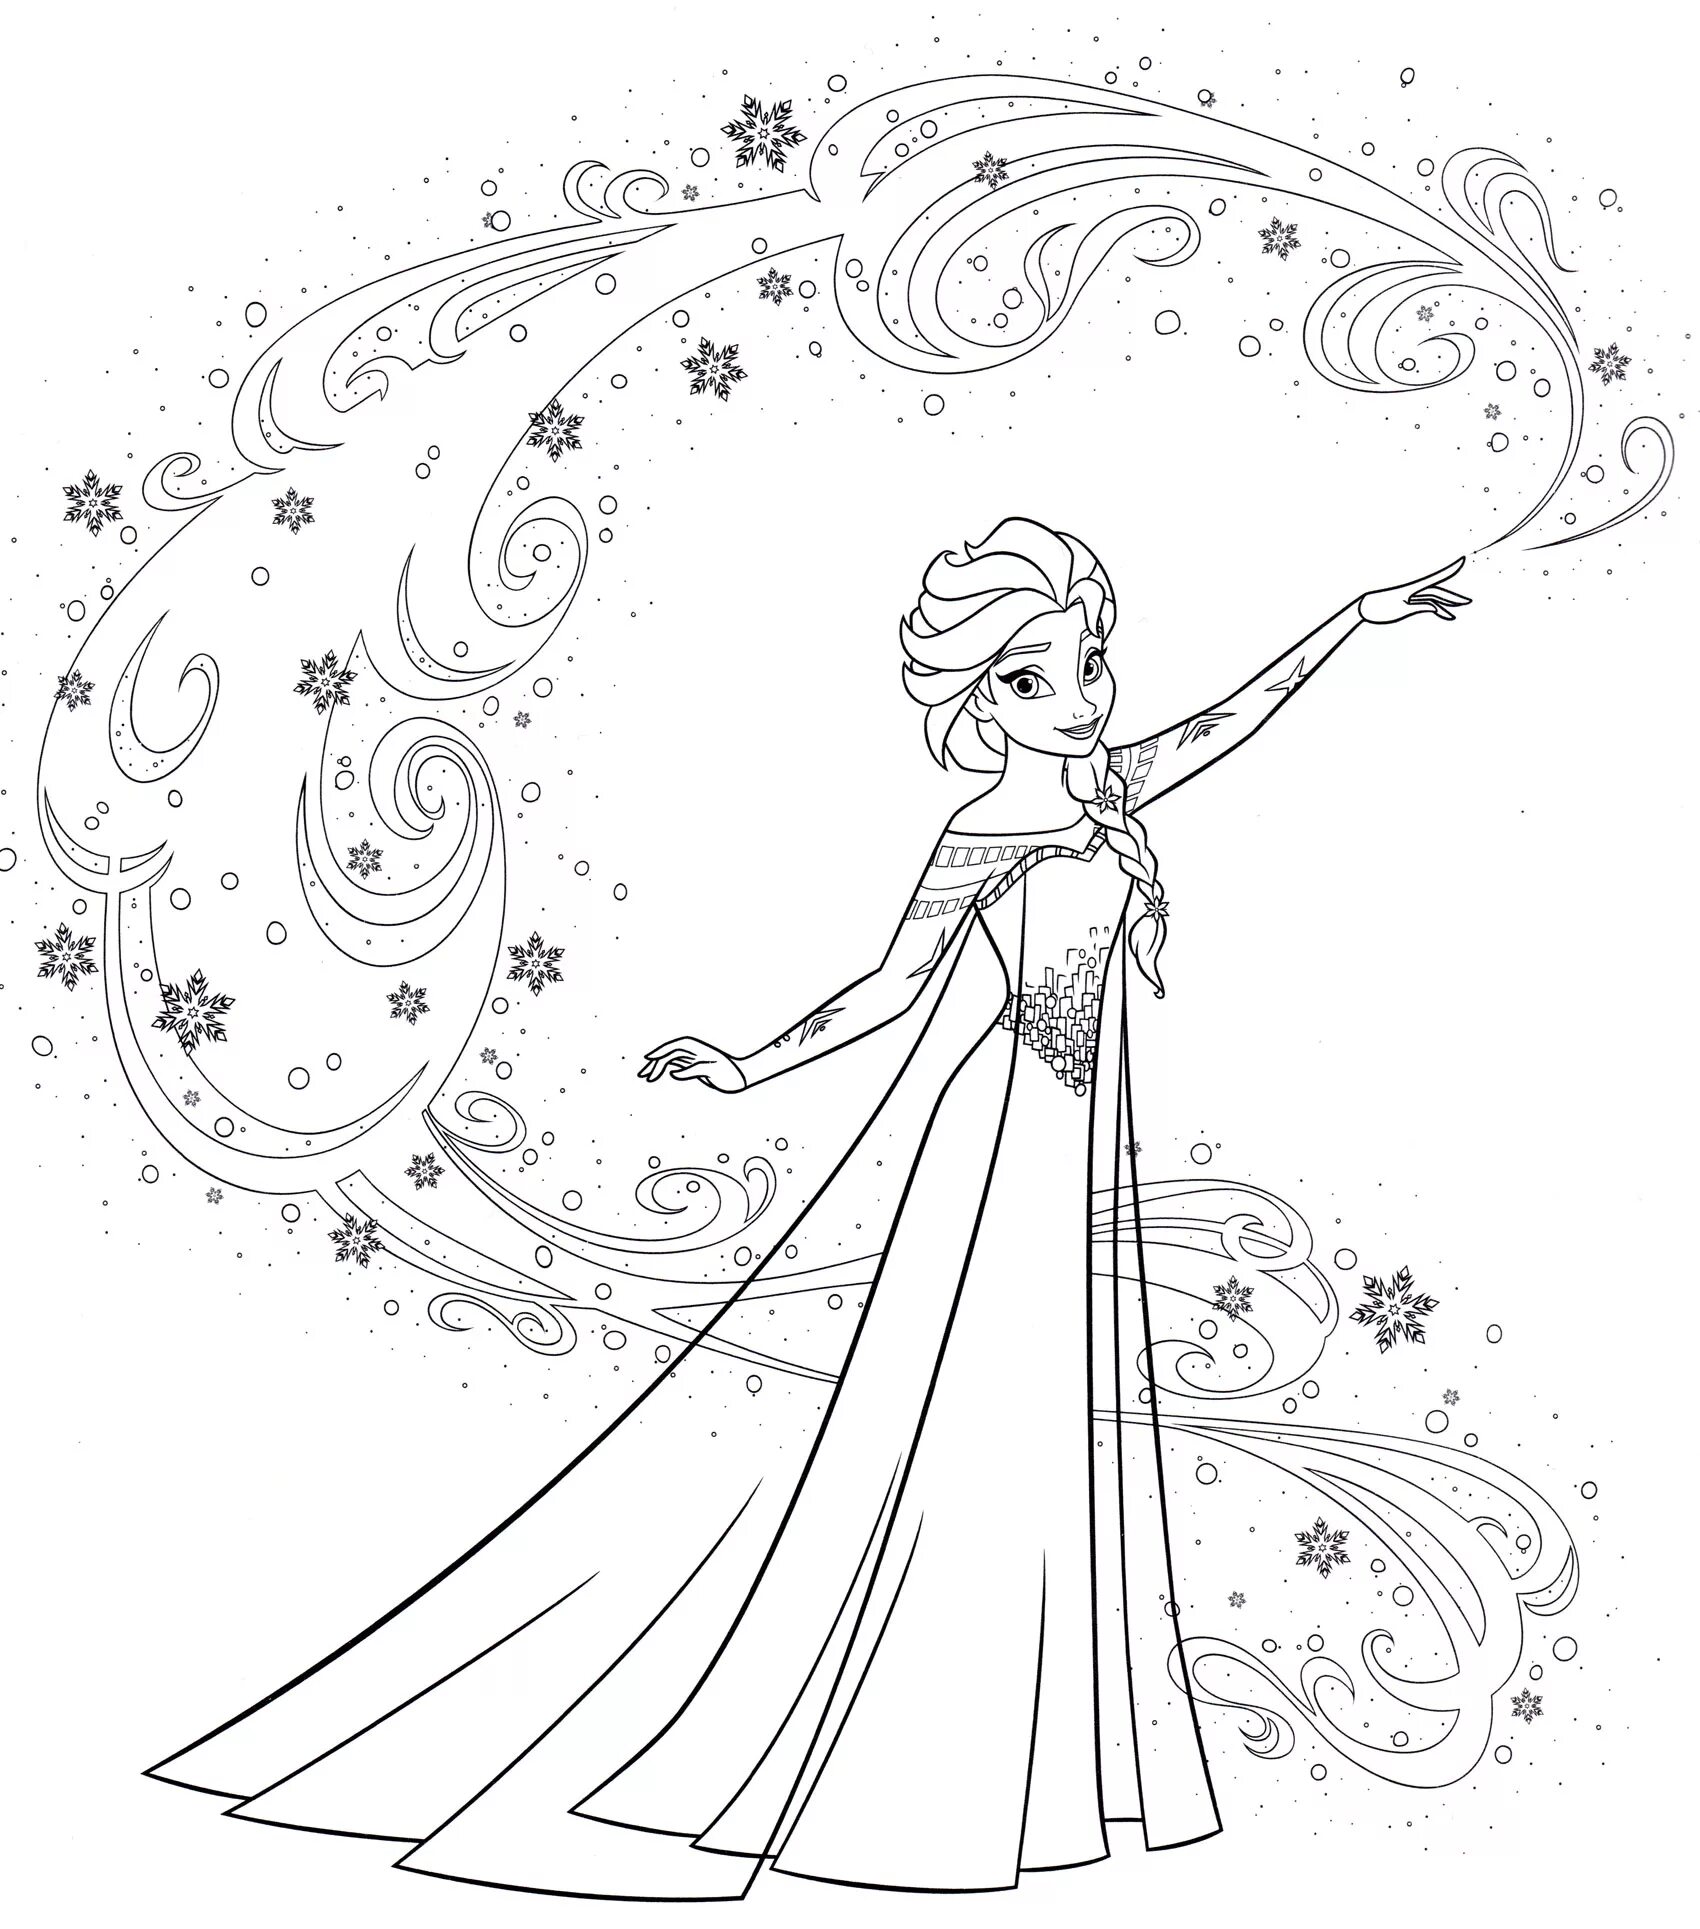 Elsa's animated coloring page